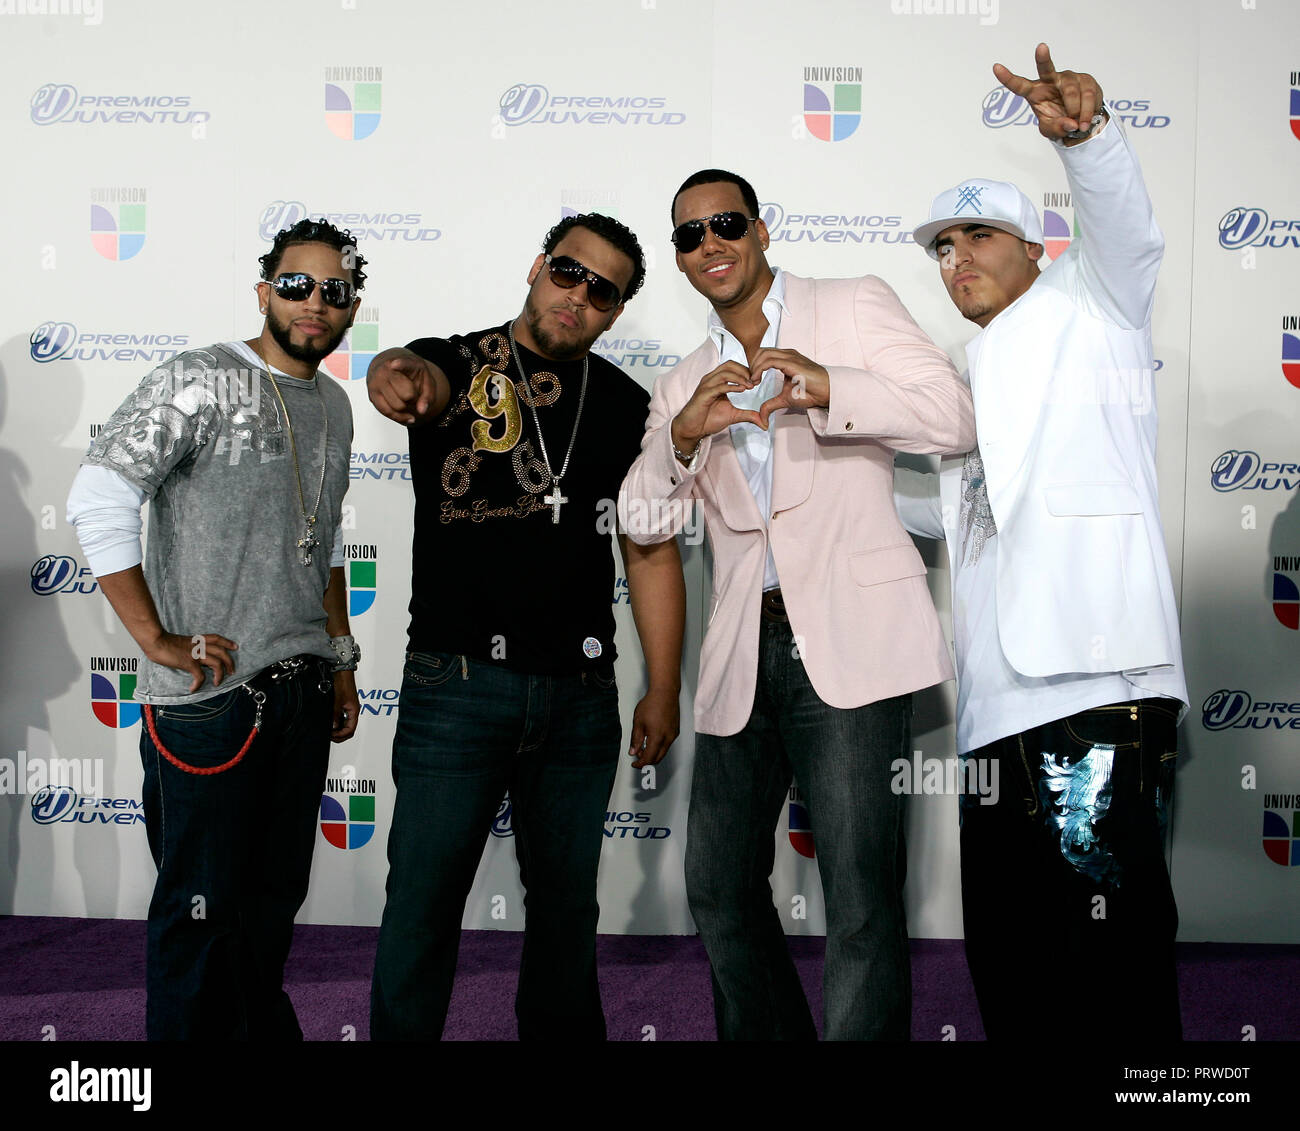 Aventura arrives for the 2007 Premios Juventud Awards at the University of Miami BankUnited Center in Coral Gables, Florida on July 19, 2007. Stock Photo